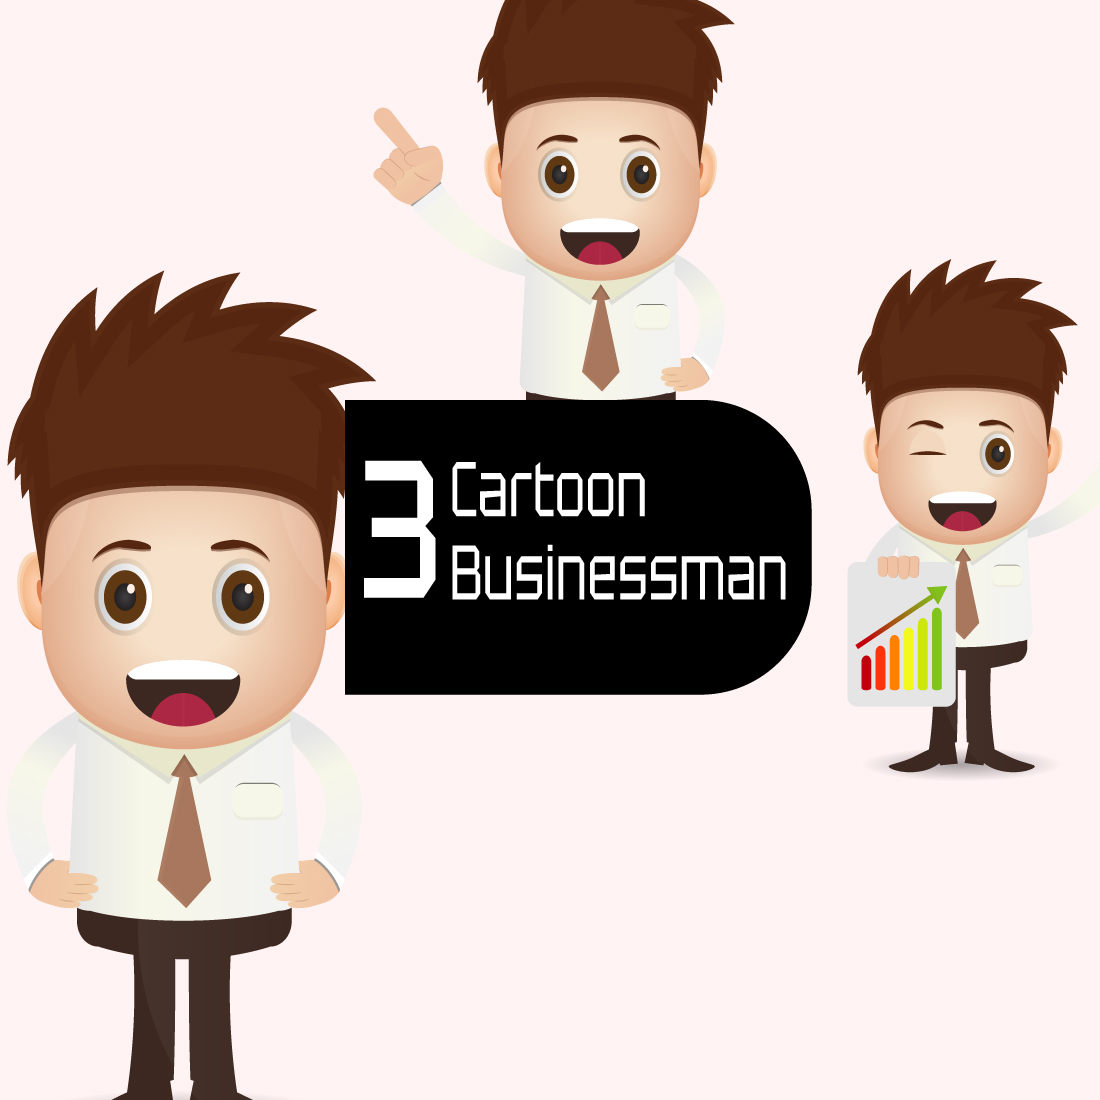 Cartoon Businessman Character cover image.